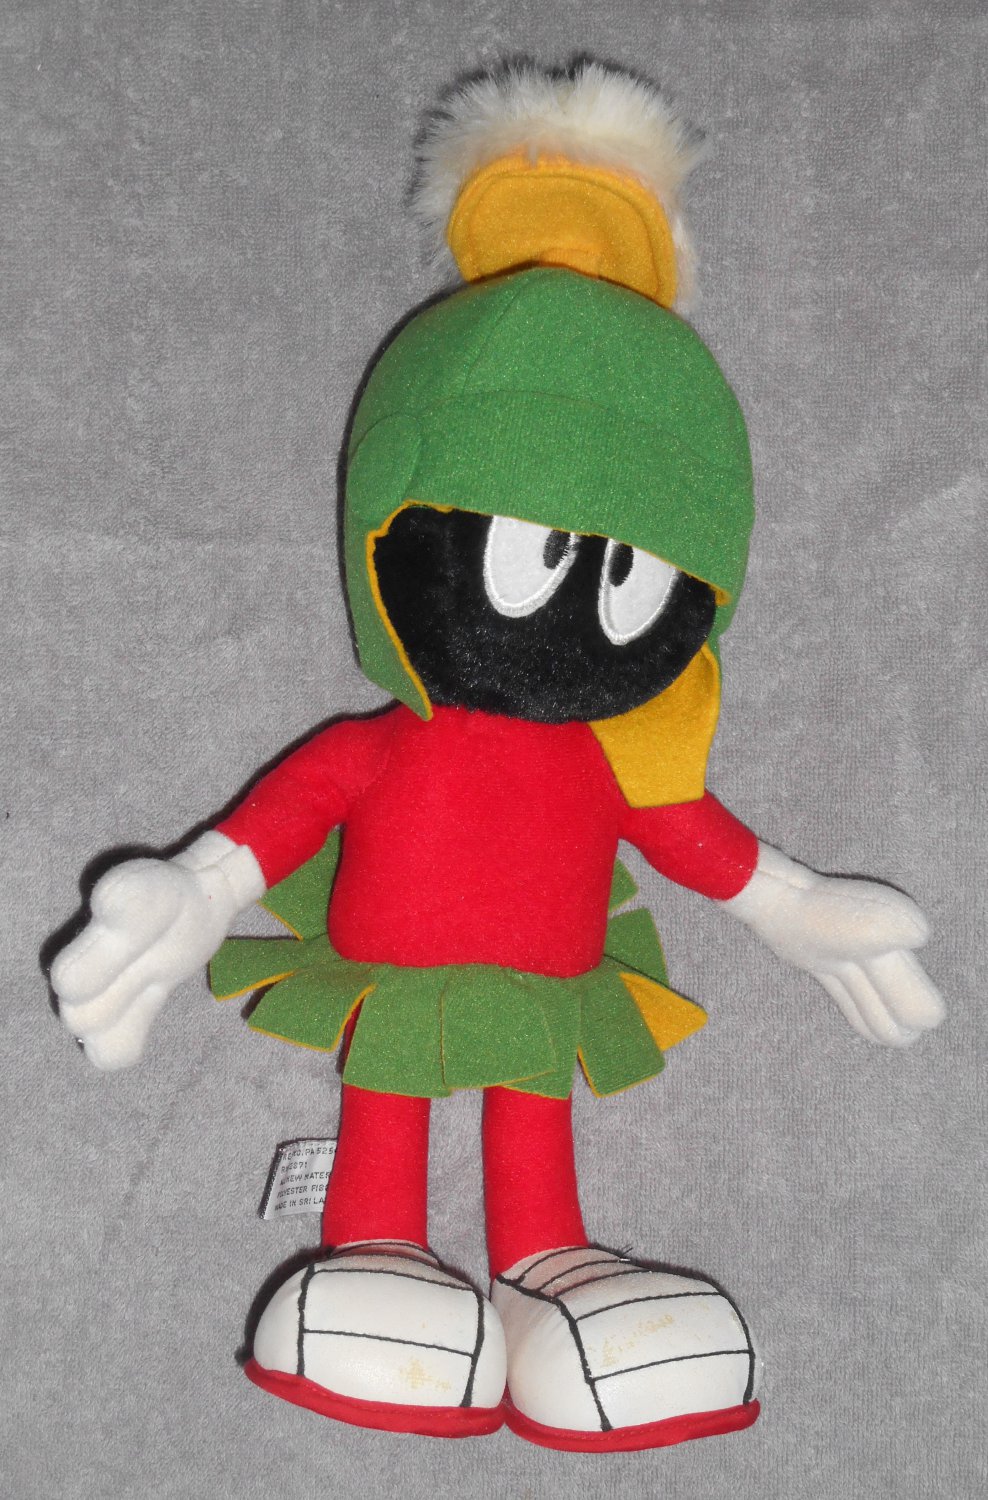 Marvin the Martian 14 Inch Posable Plush Figure Bendable Looney Tunes Warner Bros Studio Store 1995